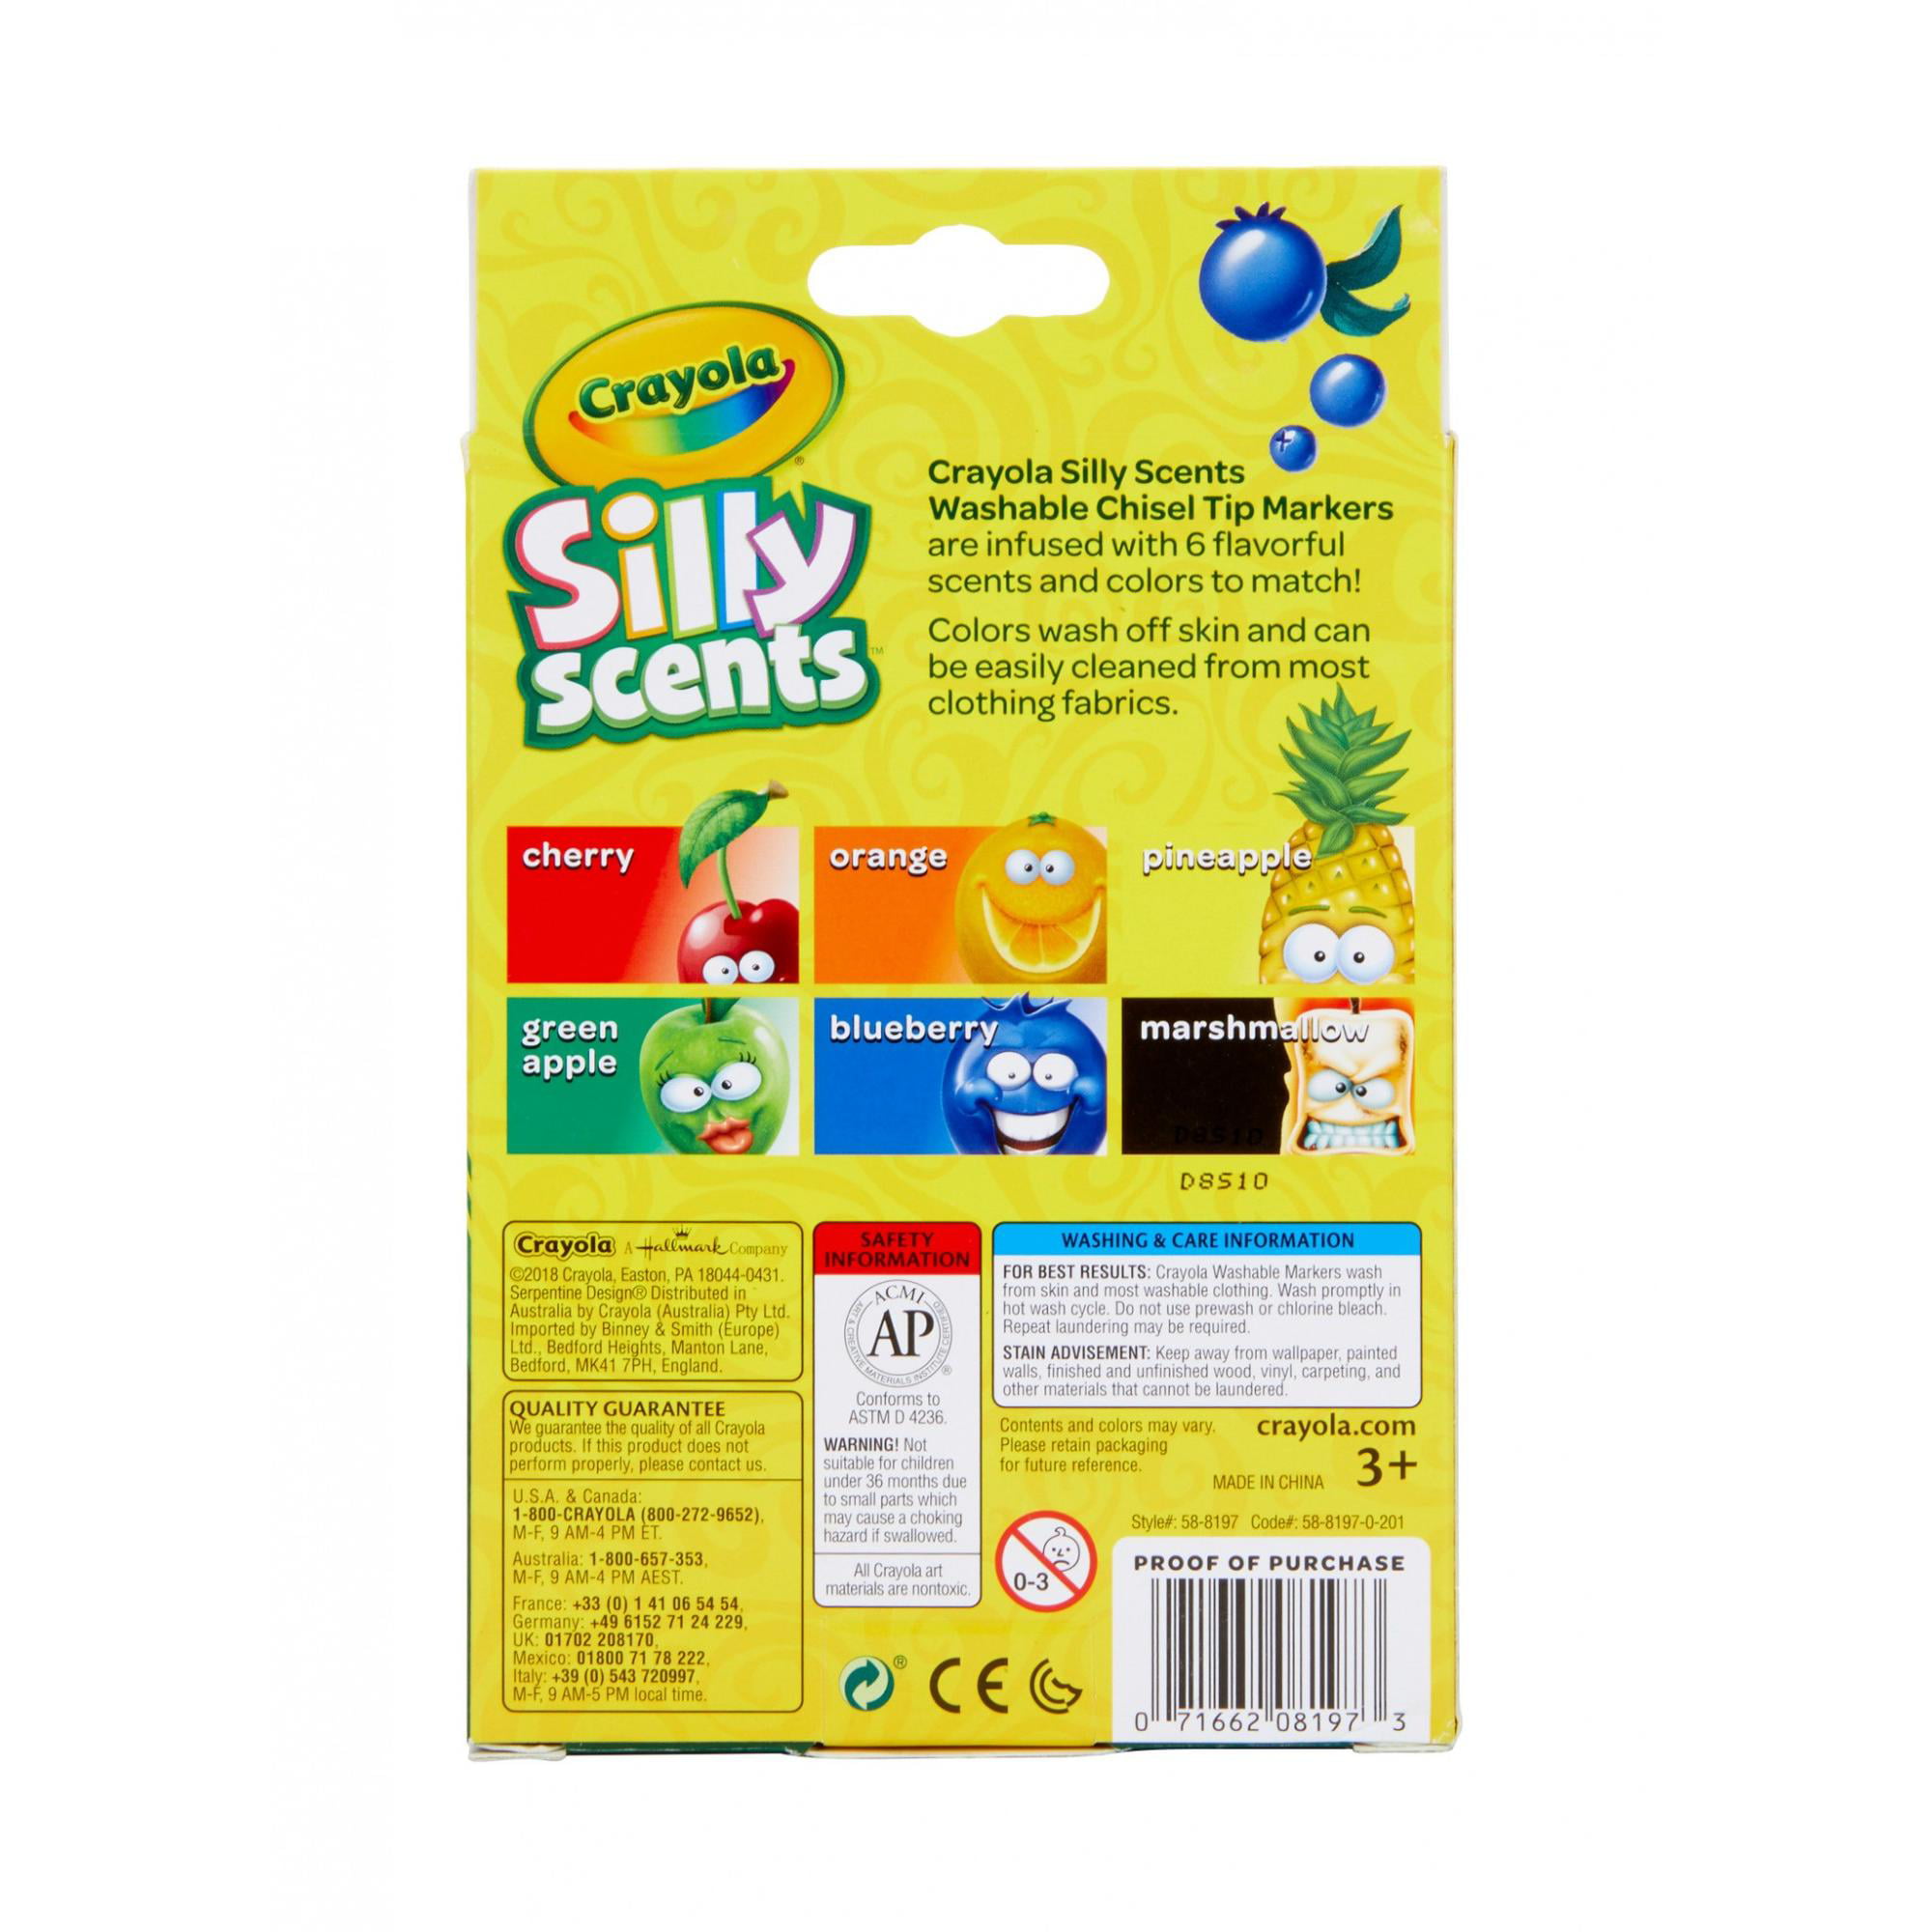 Crayola Silly Scents Slime 60x1 Ounce Scented Slime in 6 Bright Colors and Fruity Smells. Fun Size for Party Favor Bags, Kids Prizes, Classroom